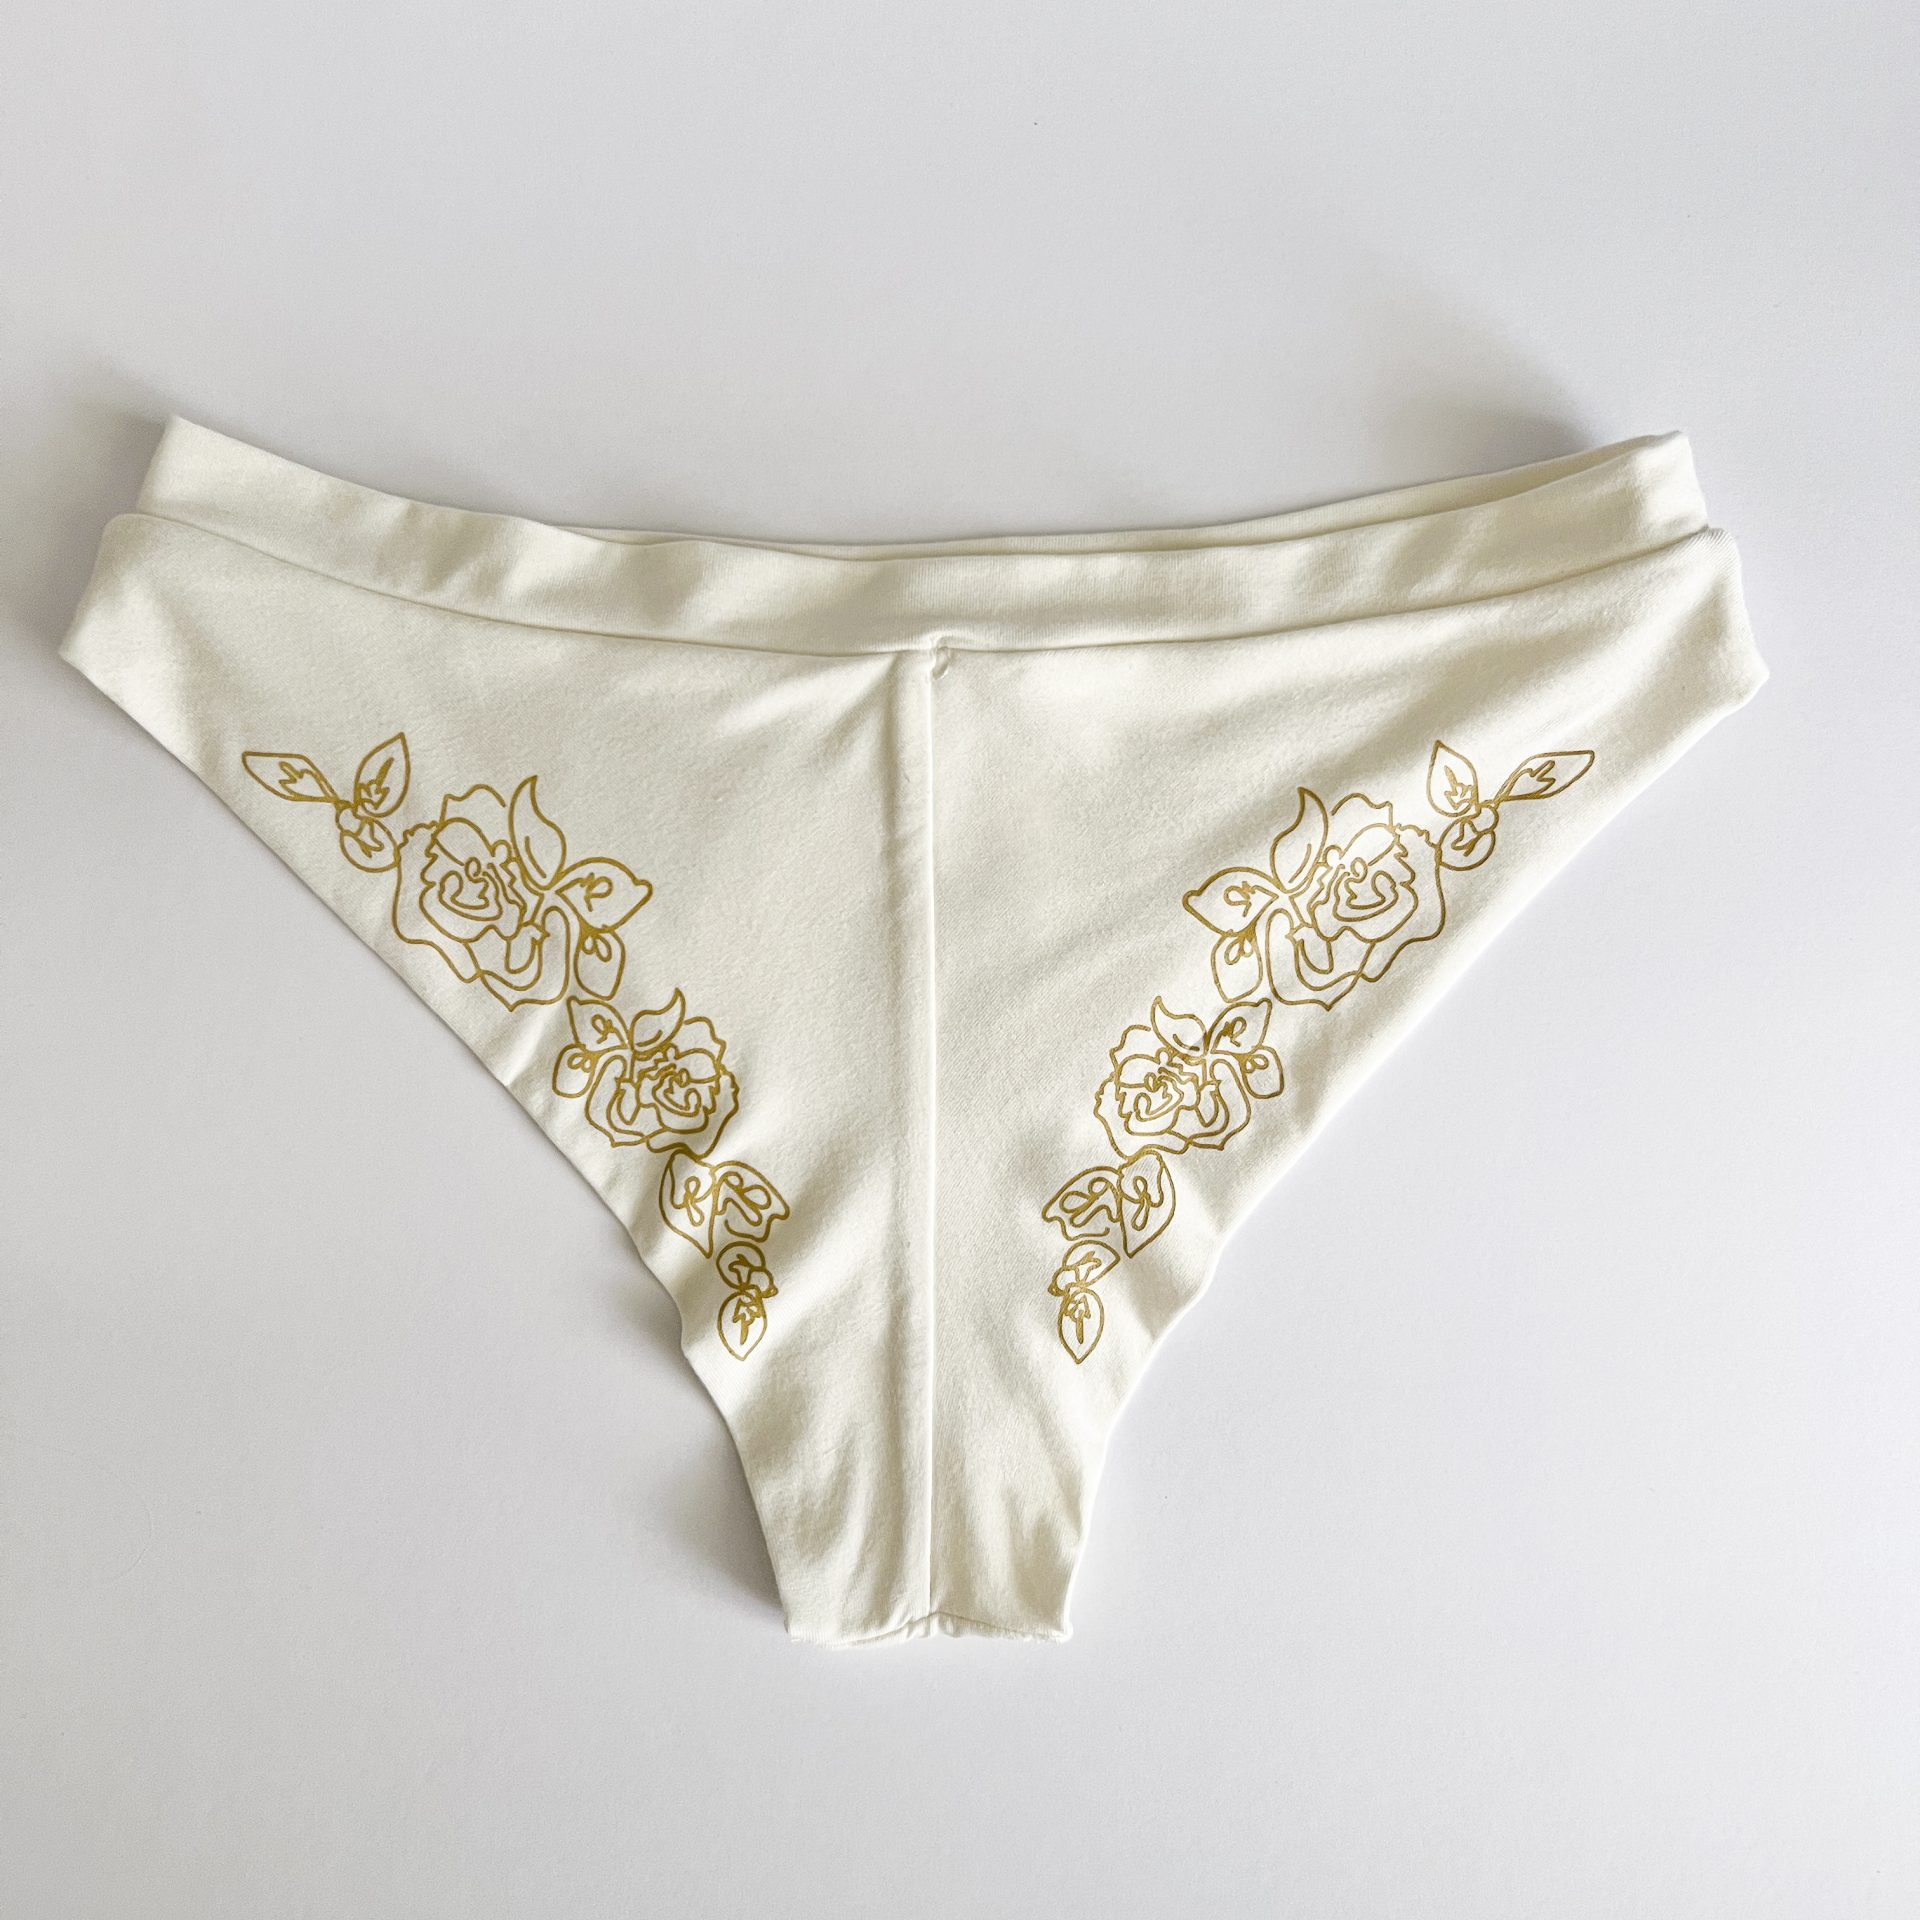 Brazilian panties with adjustable straps Mediolano Naked 19064 buy at best  prices with international delivery in the catalog of the online store of  lingerie